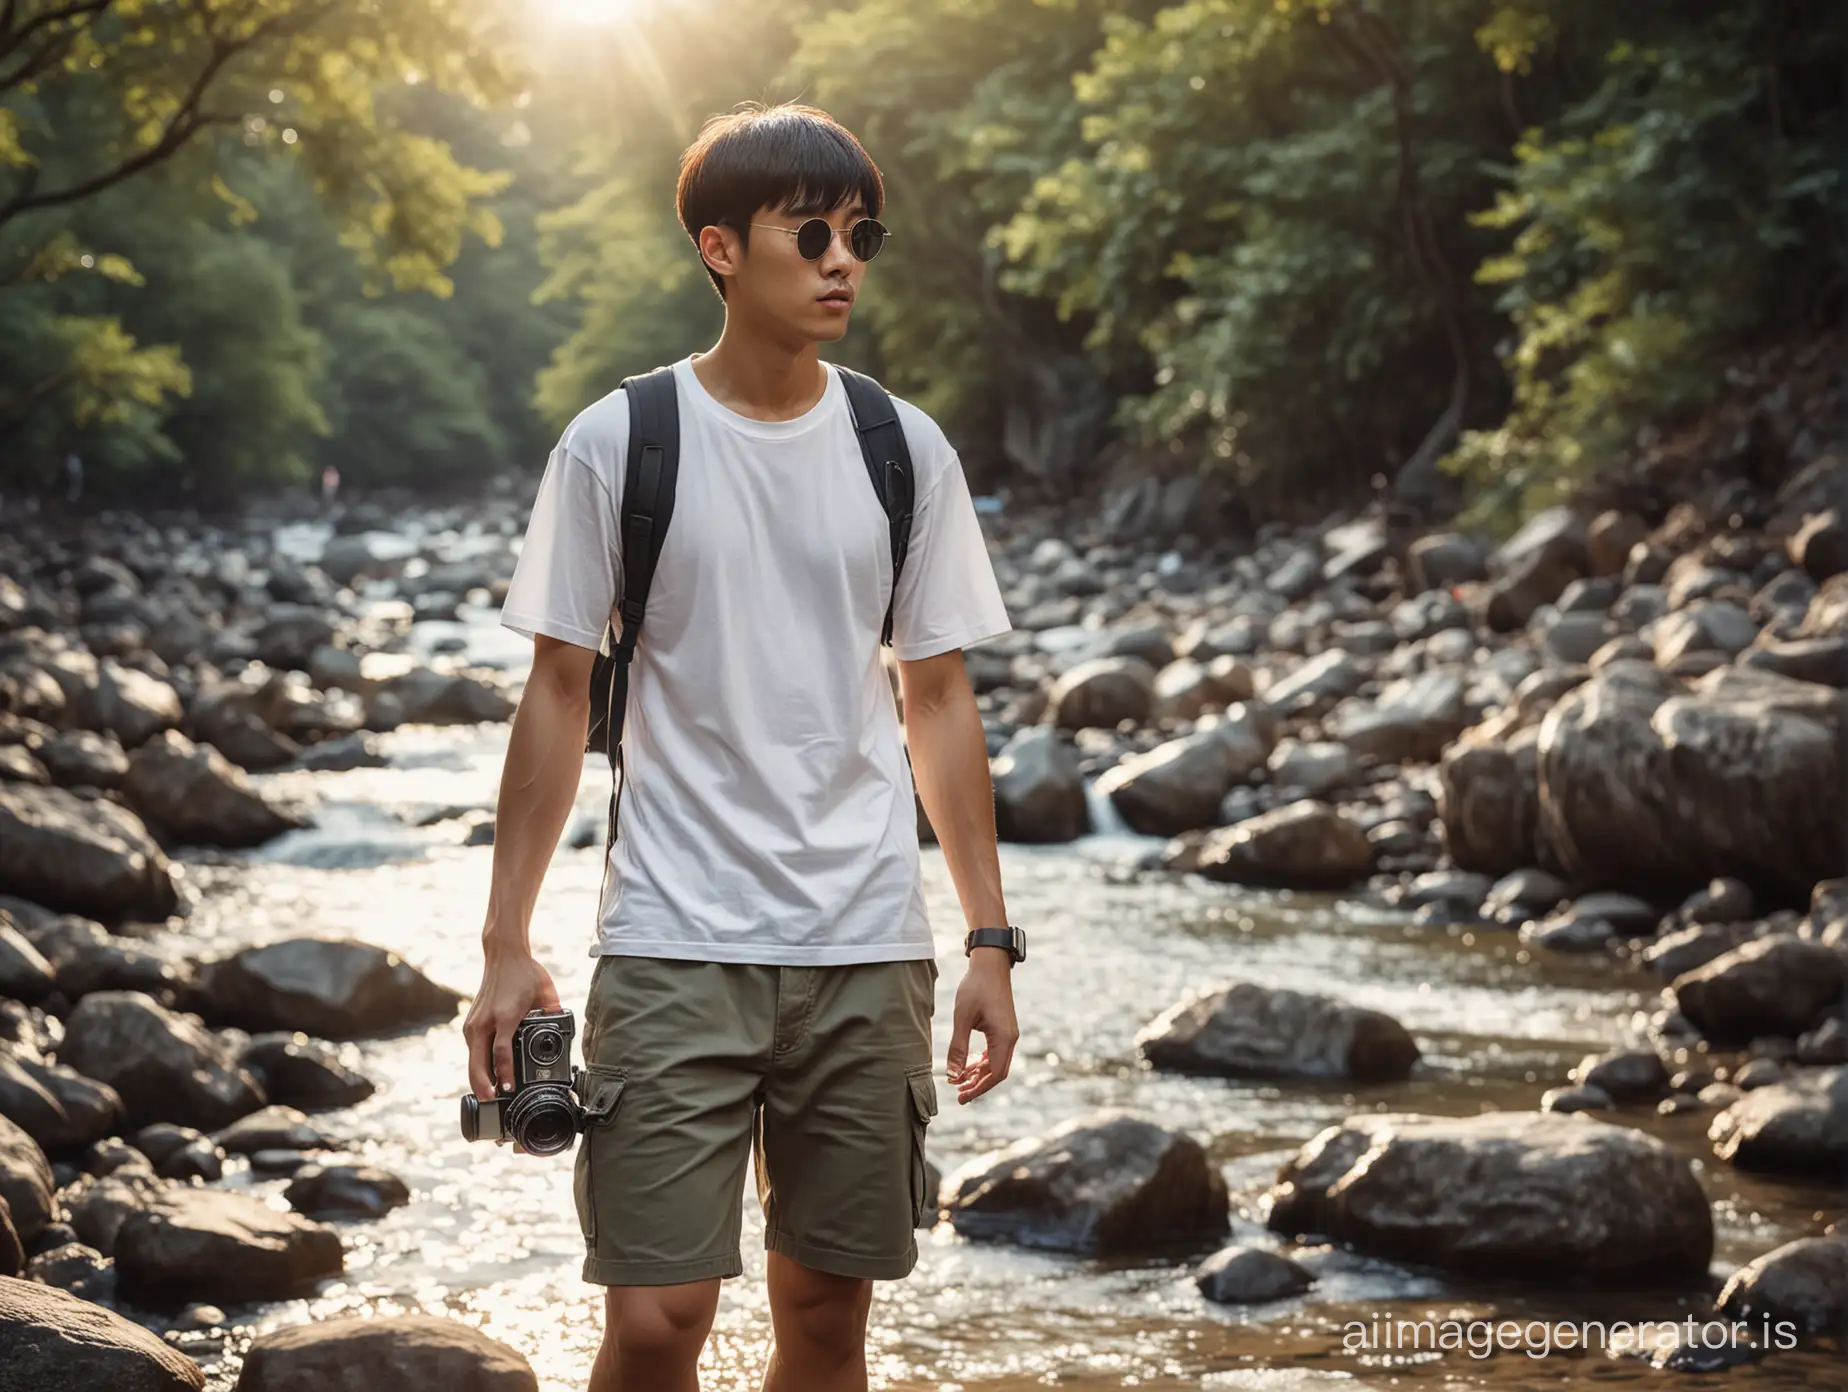 dynamic portrait, long shot, a Korean man with bowl cut hair. wearing white t-shirt , wearing sunglasses, standing barefoot, carrying a retro Camera and backpack, daydreaming on rocks with a small river flowing clear, bokeh background with a natural waterfall, refracted sunlight behind him at dusk, cinematic images, professional photography, dynamic lighting, faces looking at the camera